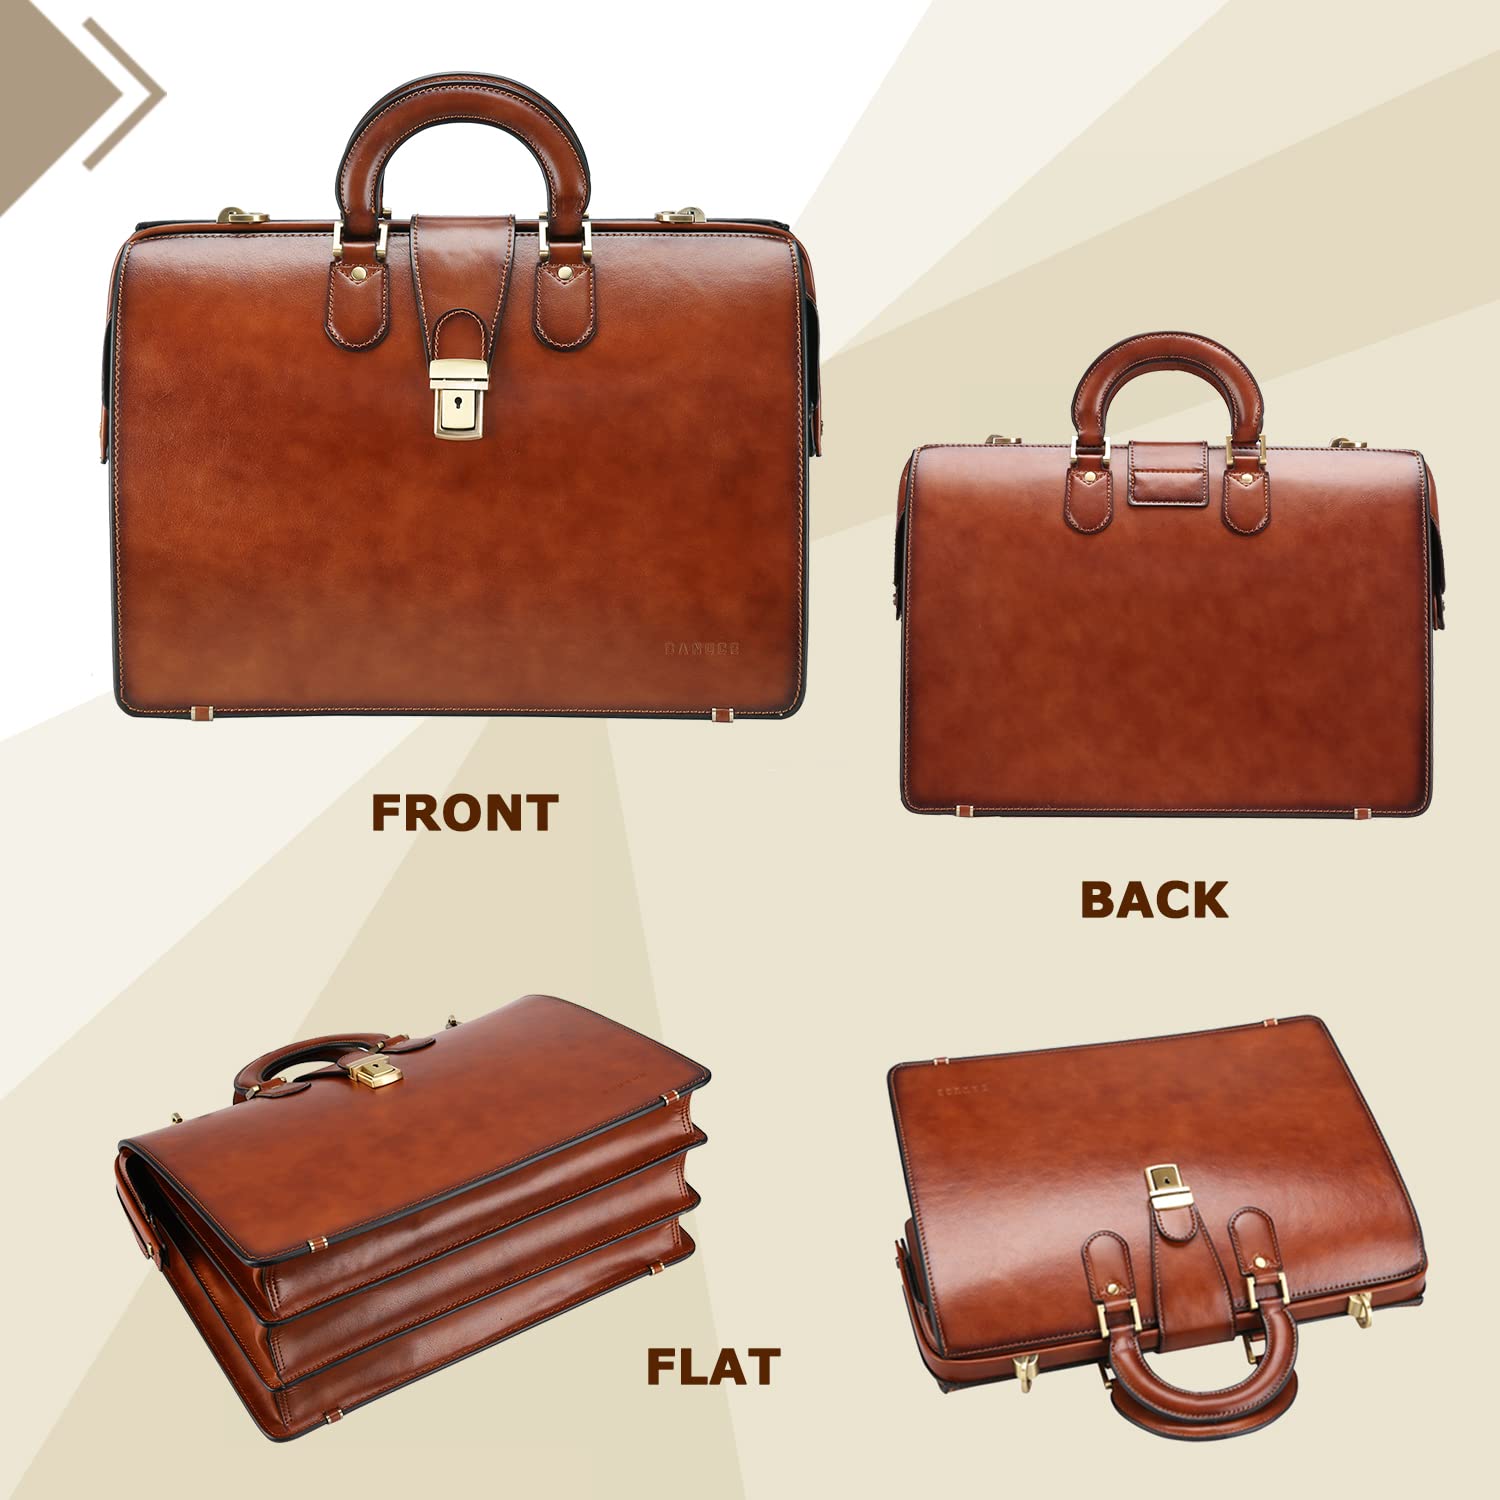 Banuce Vintage Leather Briefcase for Men with Lock Lawyer Attorney Bag Doctor Bag 15.6 Inch Laptop Attache Case Hard